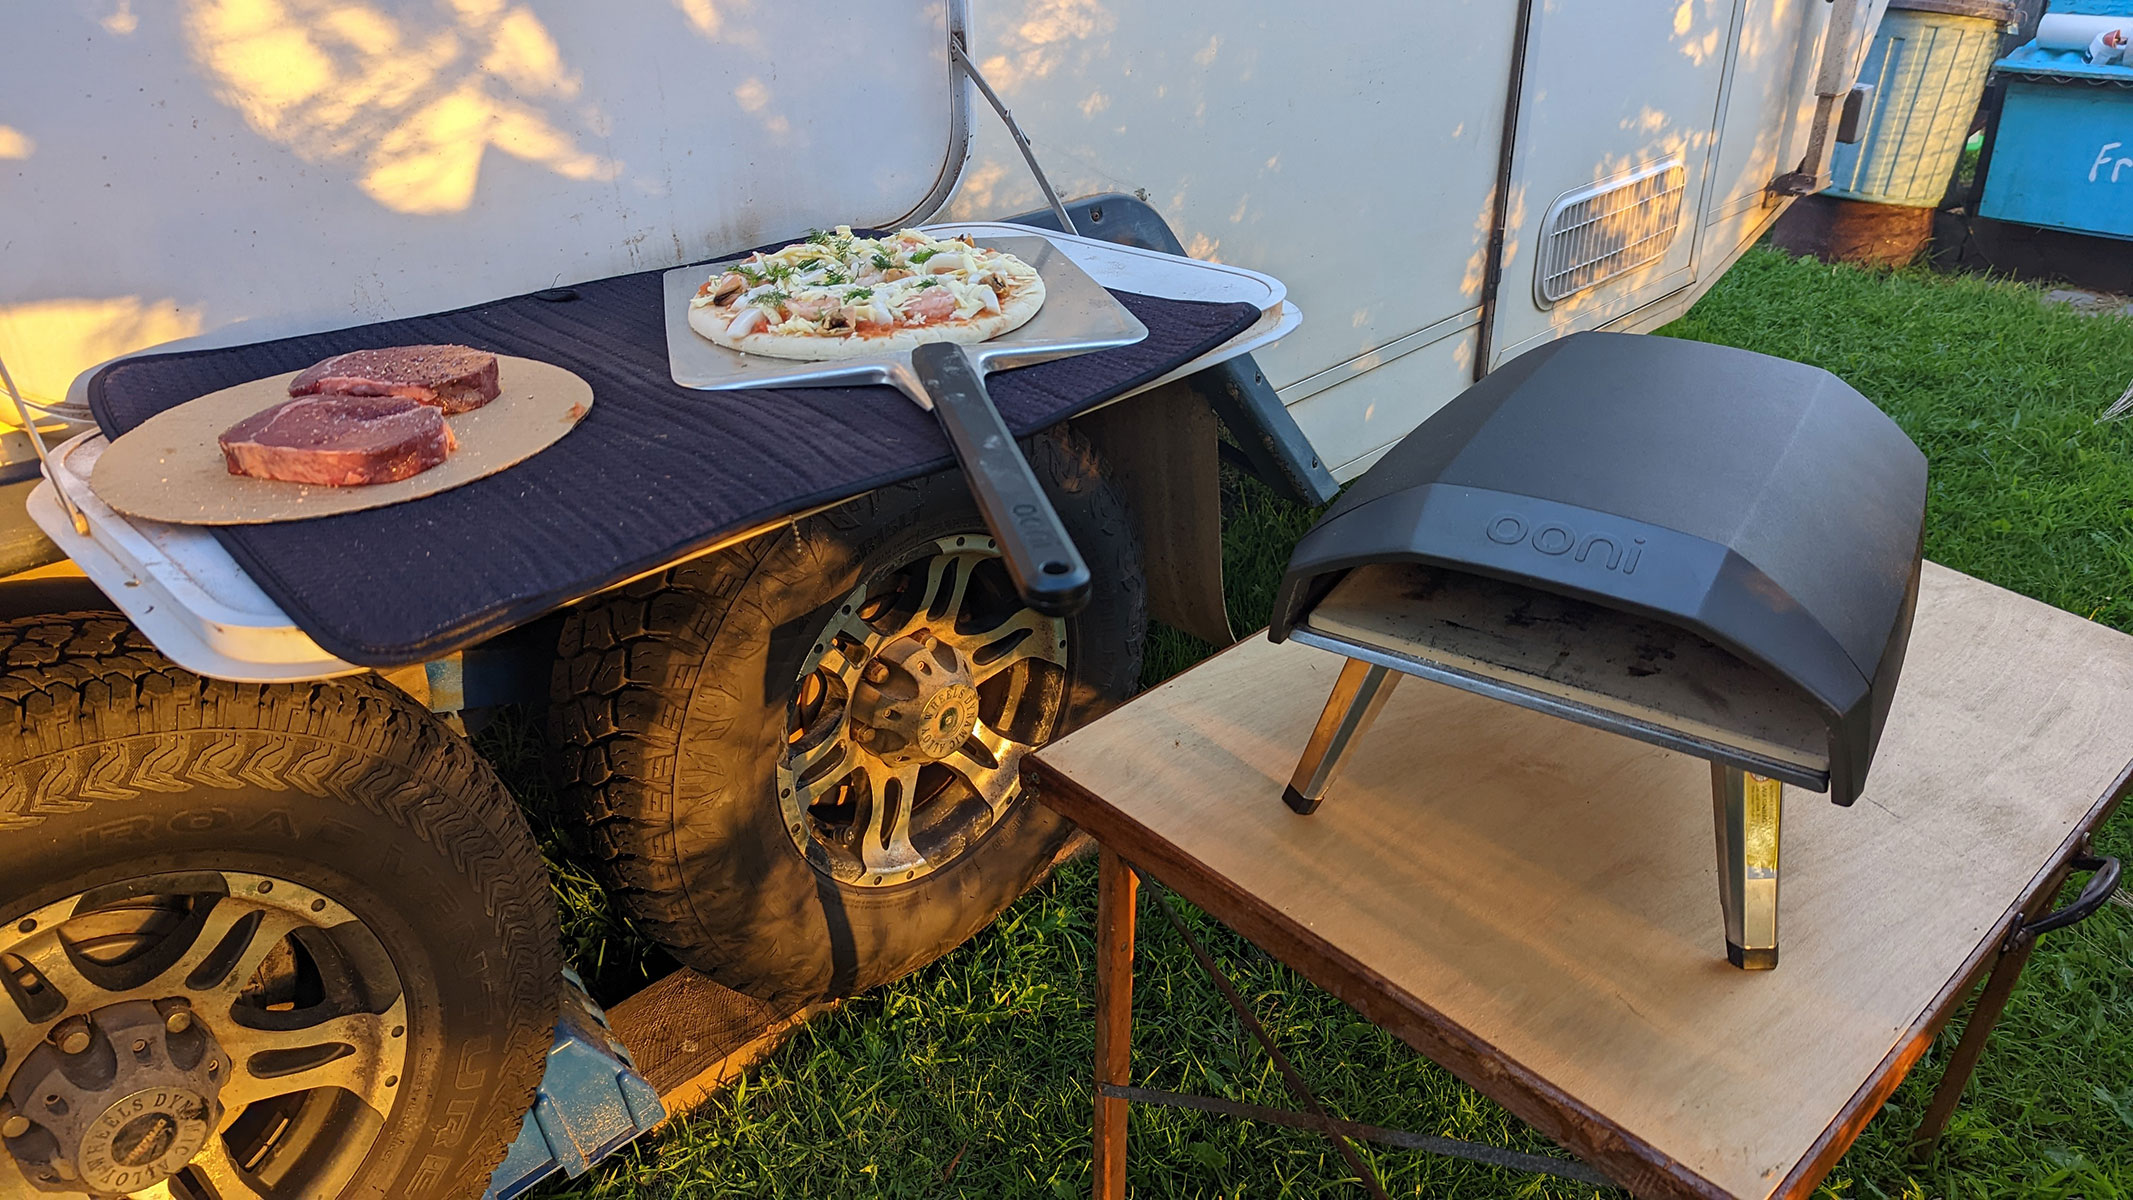 Ooni Koda 12 Review: Compact Gas Pizza Oven